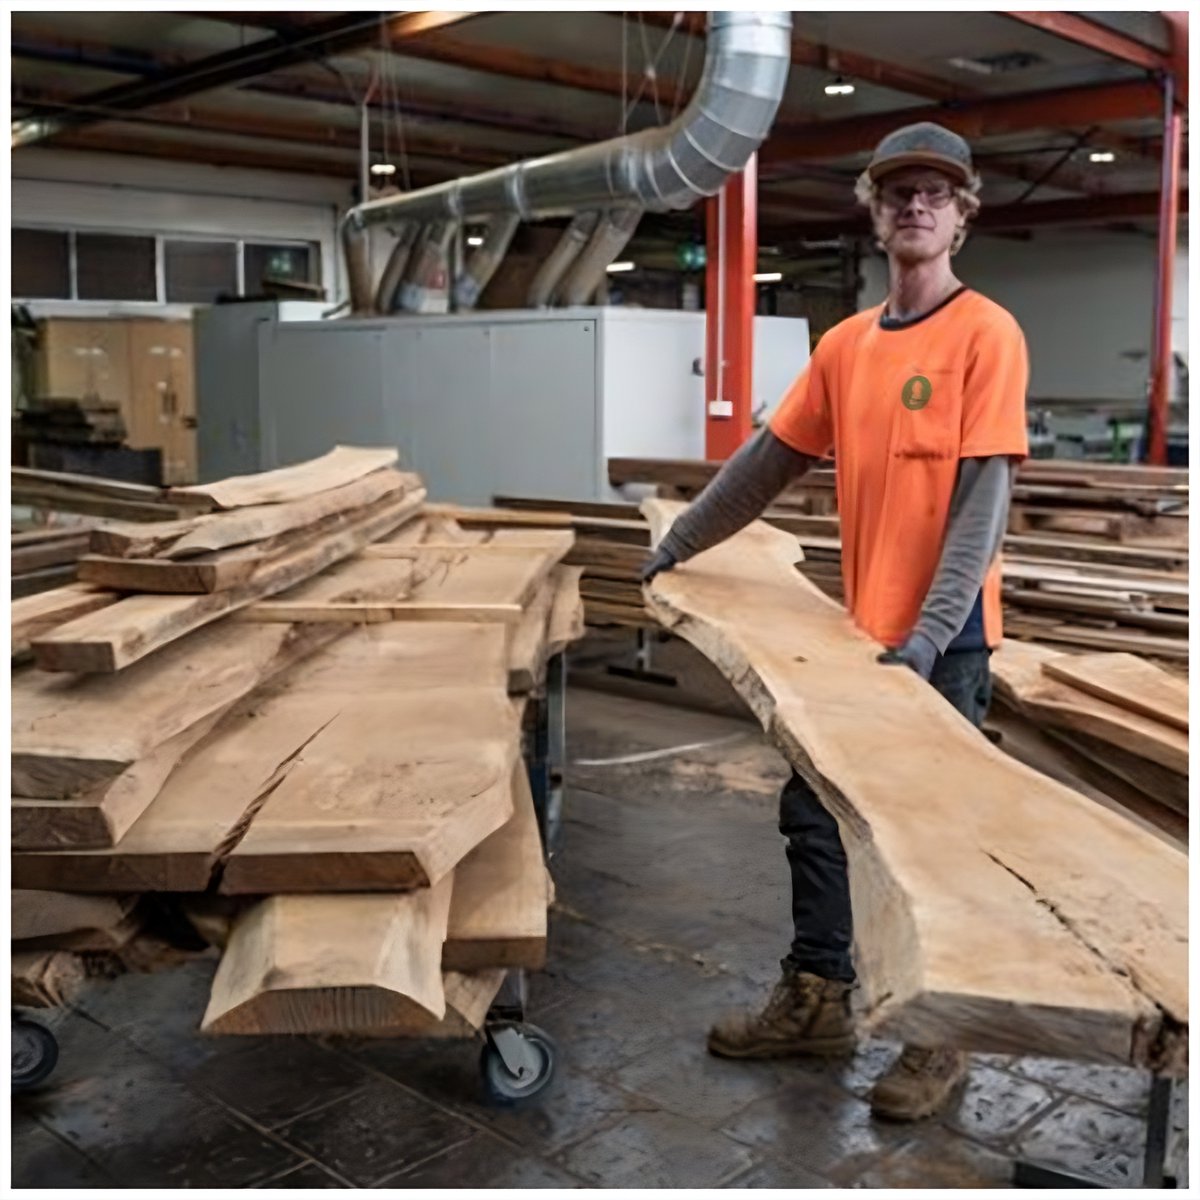 At White Knight Consulting LTD, we're all about transforming raw potential into refined excellence.

Buy Now: wknightconsulting.com

#wood #timber #lumber #woodslabs #woodworking #woodexport #timbermerchant #woodsupplier #whiteknightconsulting #WKC #worldwide #delivery #buynow